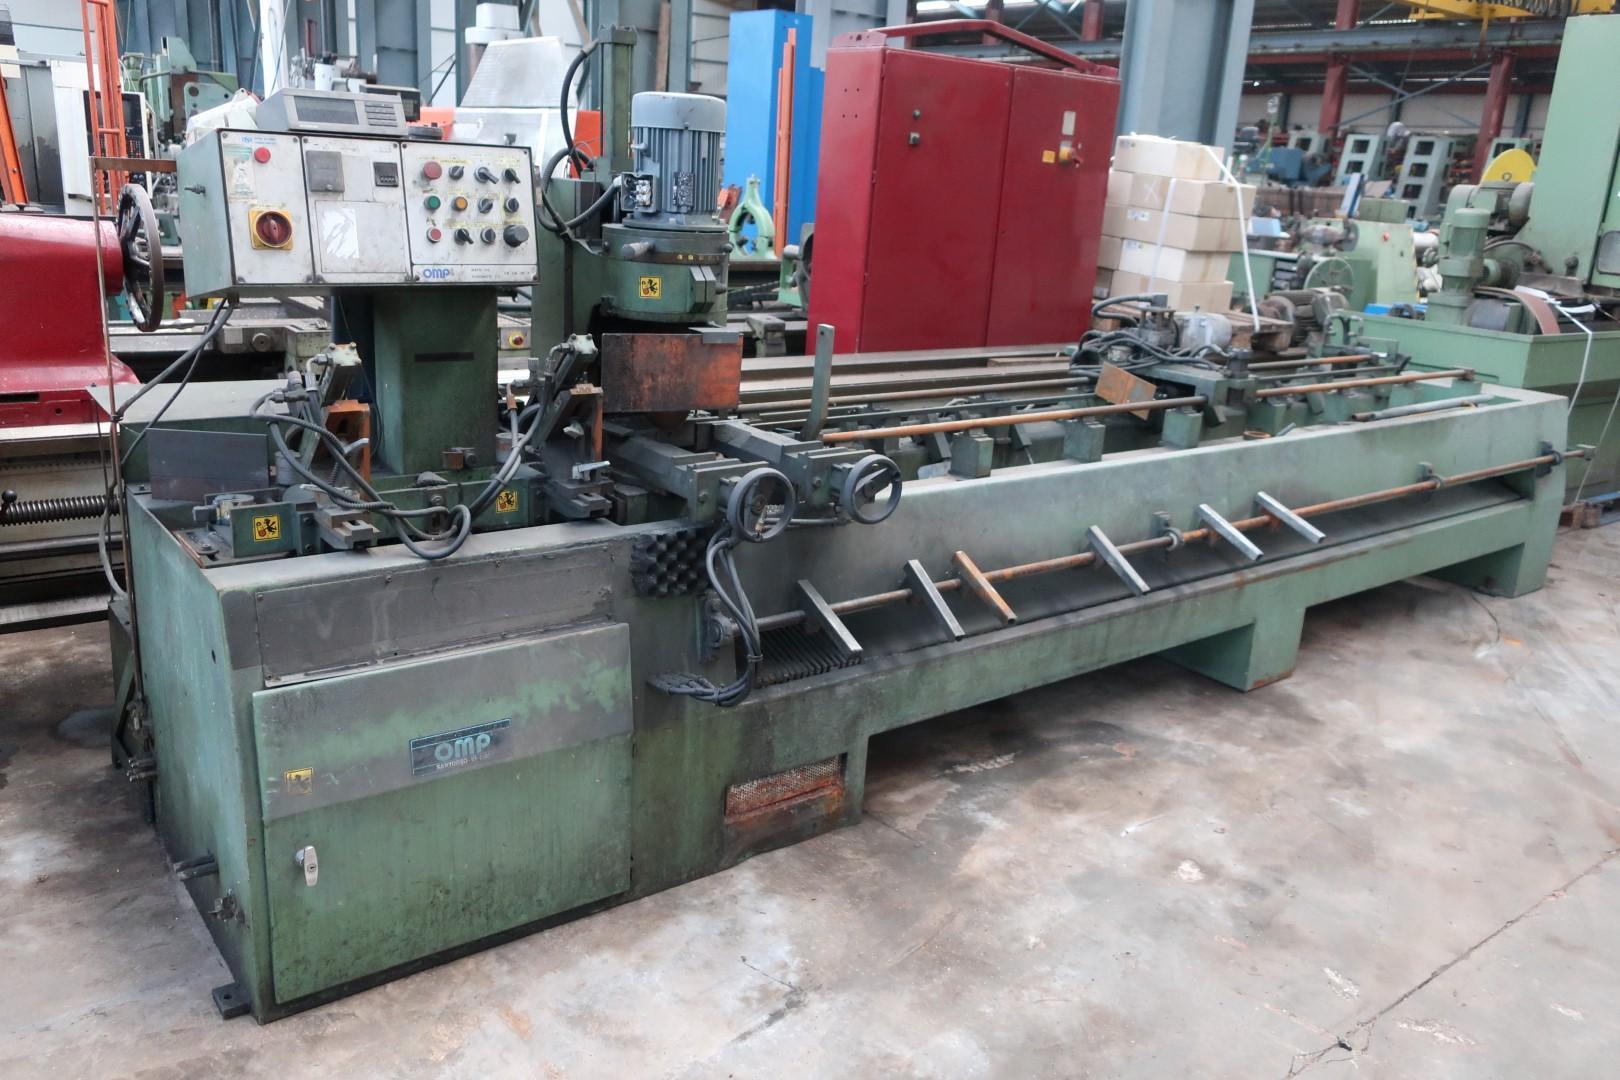 Sawing/OMP - Matic 315